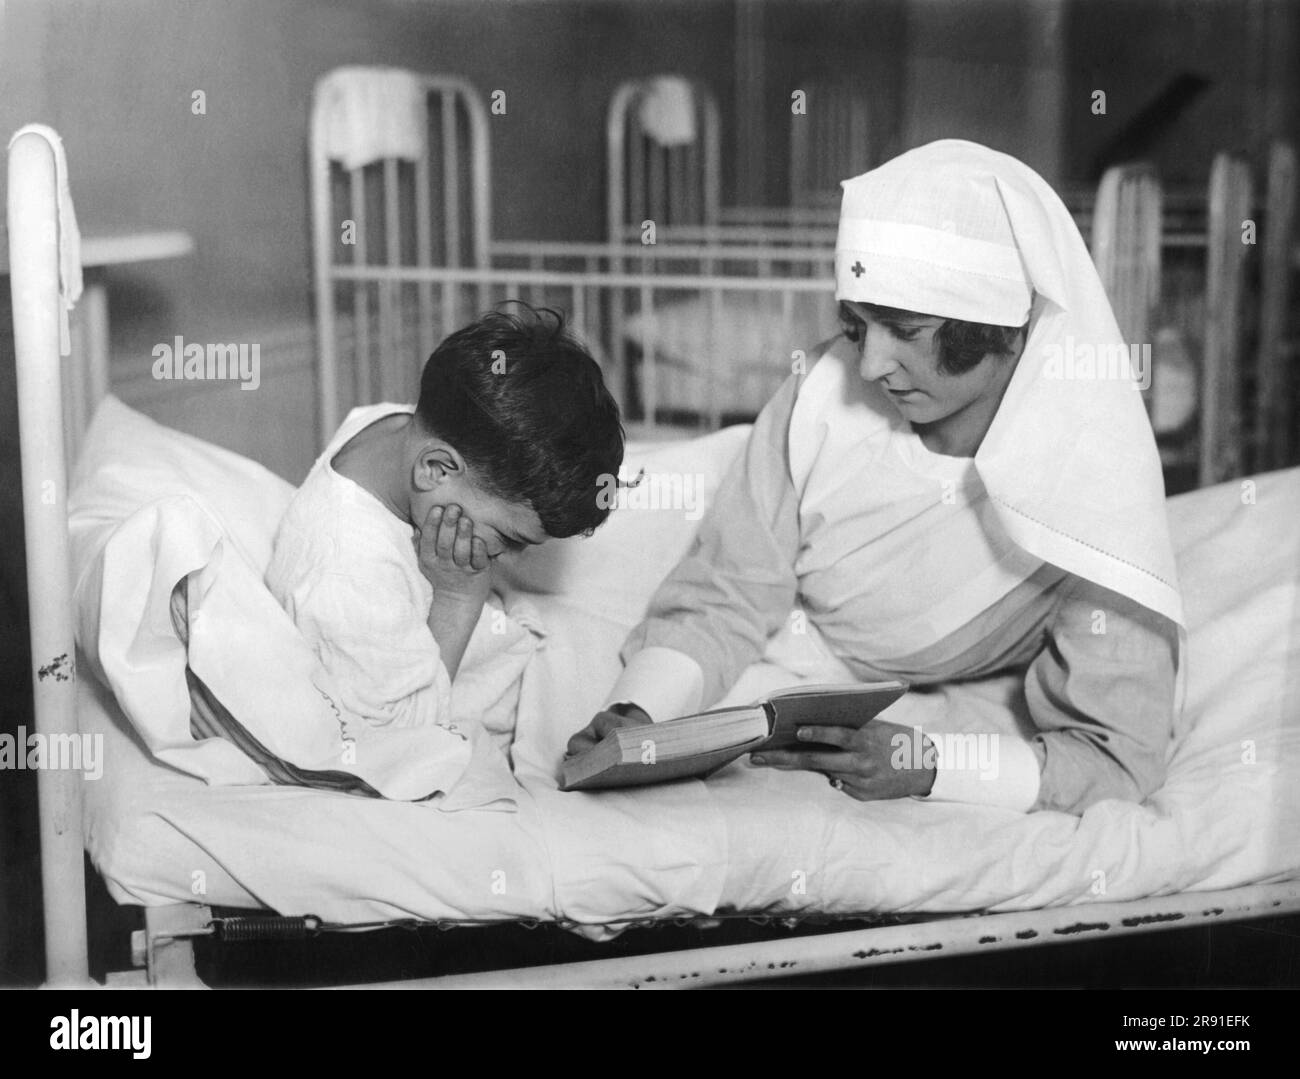 New York, New York:  January 5, 1926 New York City society girls are spending one day a week as volunteer nurses as part of their service to humanity. Miss Betty Nixon is seeing reading to a young boy at the Tonsil Hospital in Manhattan. Stock Photo